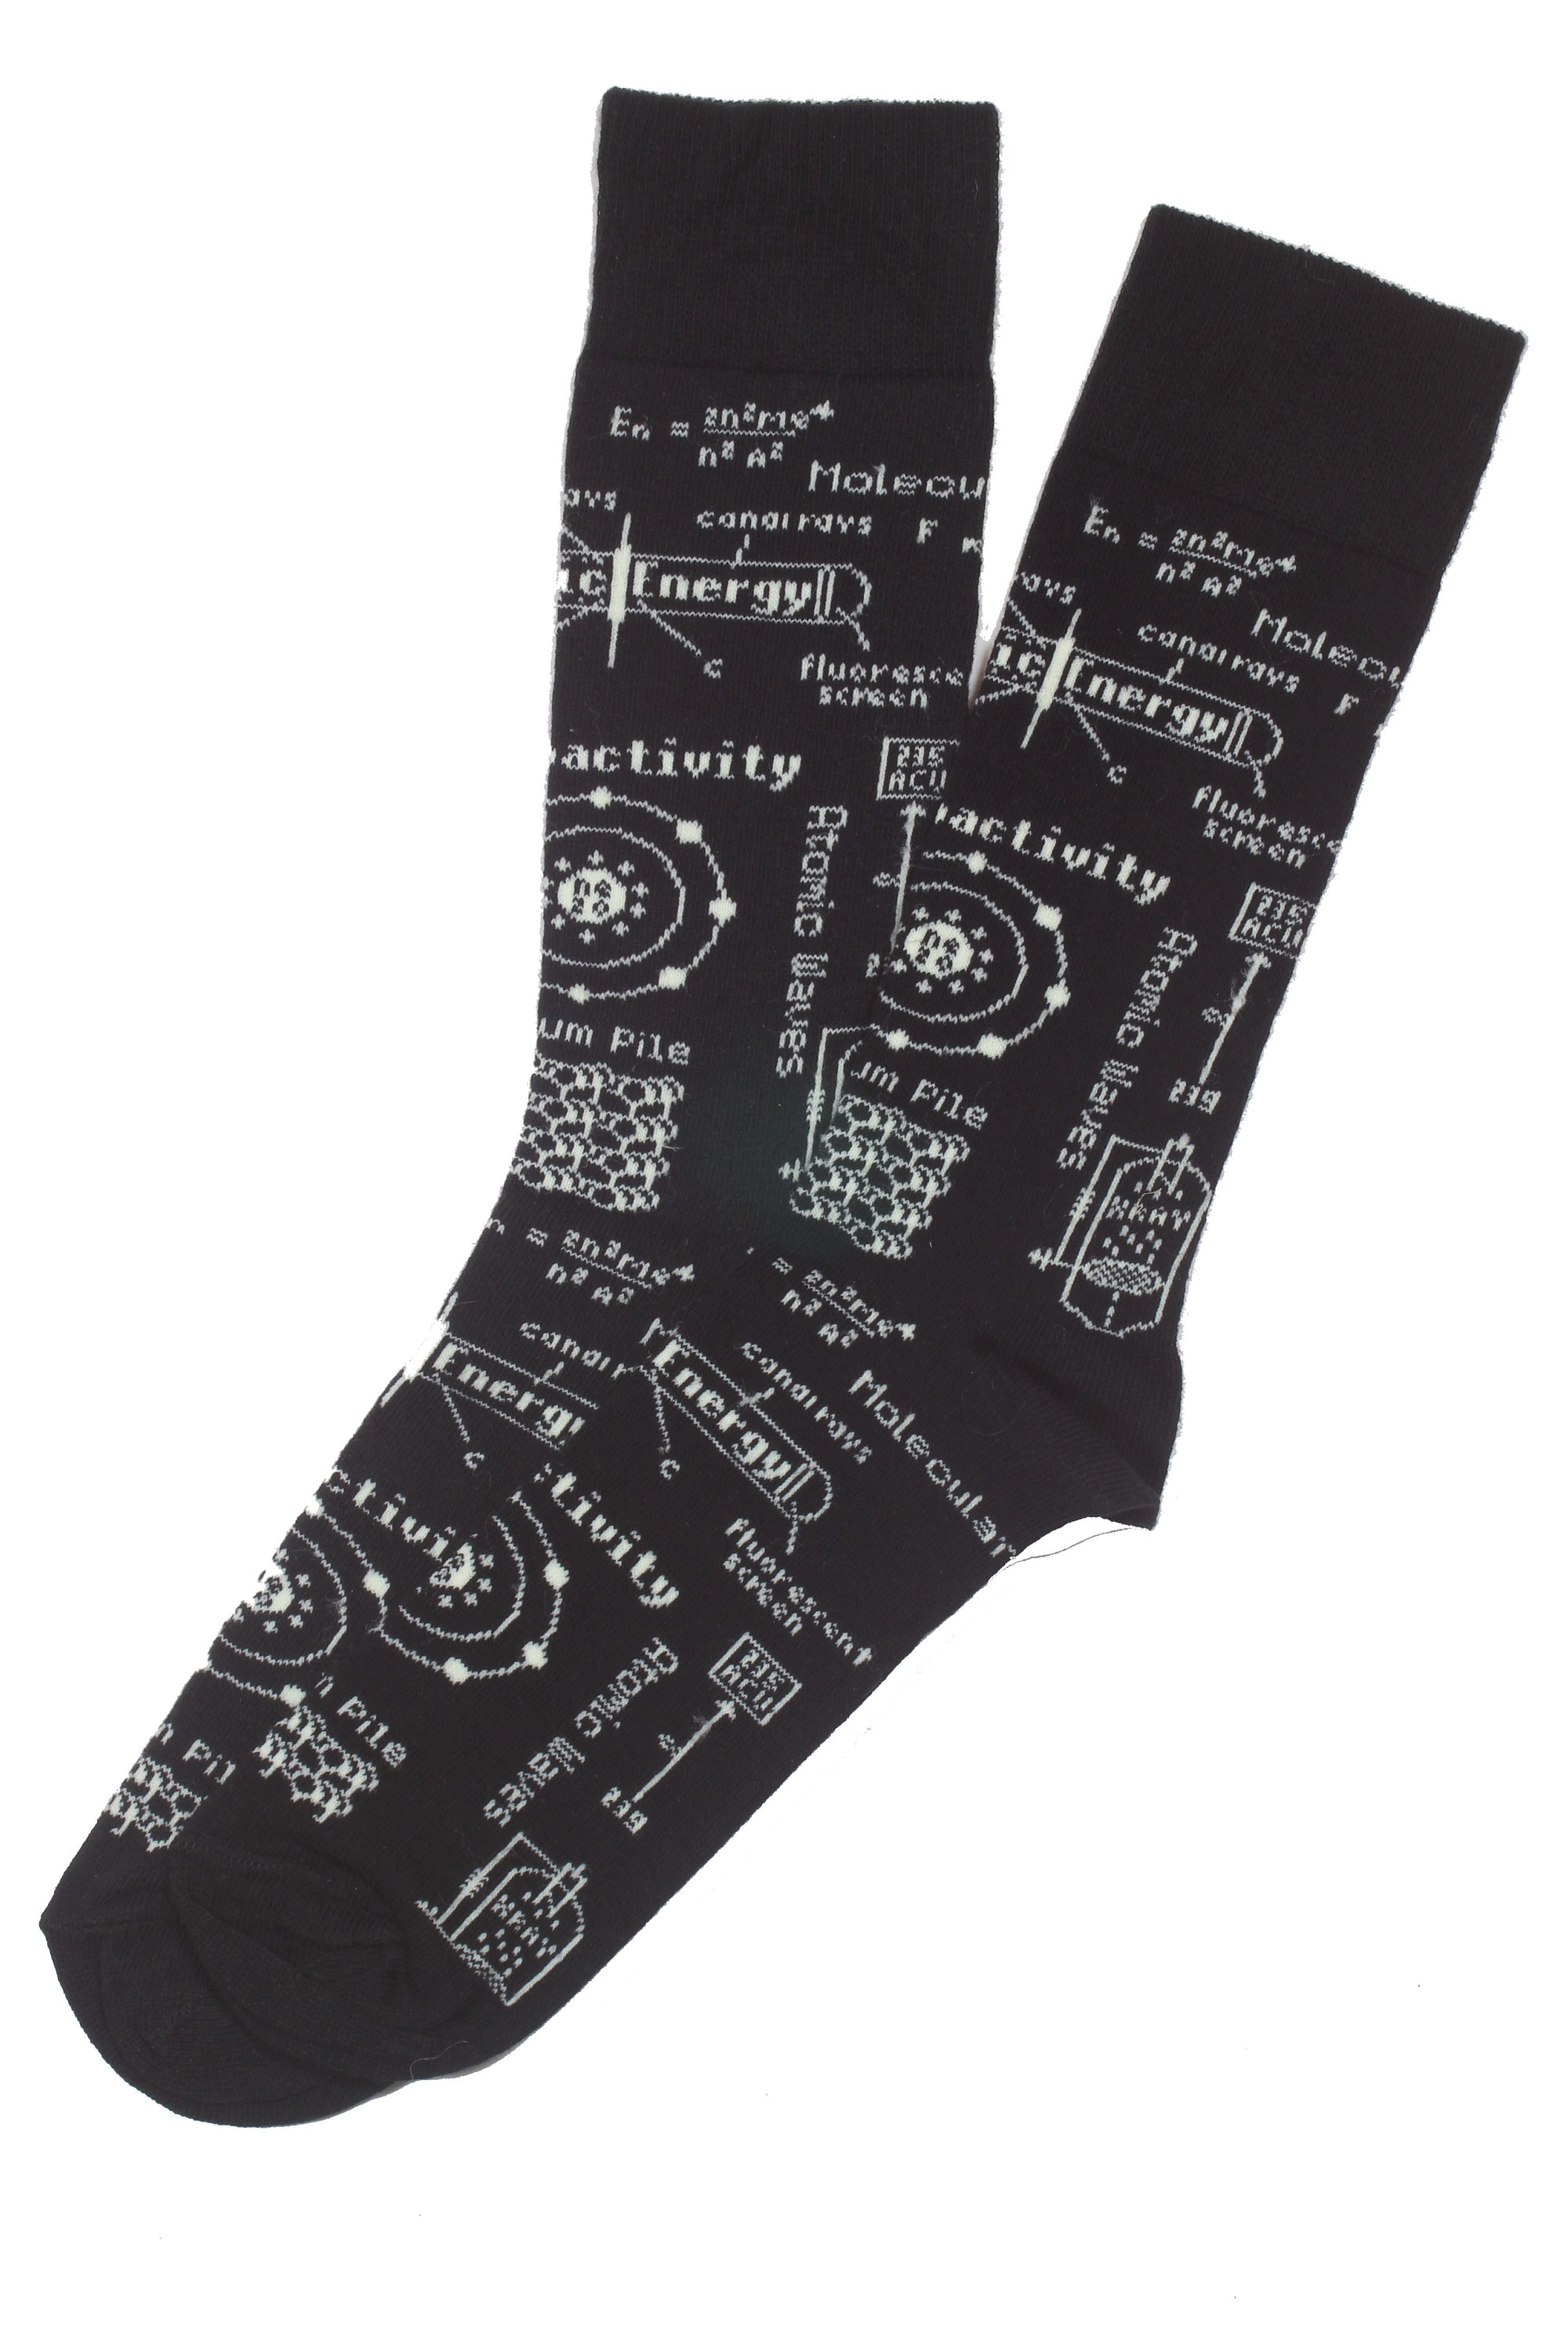 Quality Socks Nuclear Physics Science Scientist Formula Formulae Mid Calf Unisex Perfect Gift